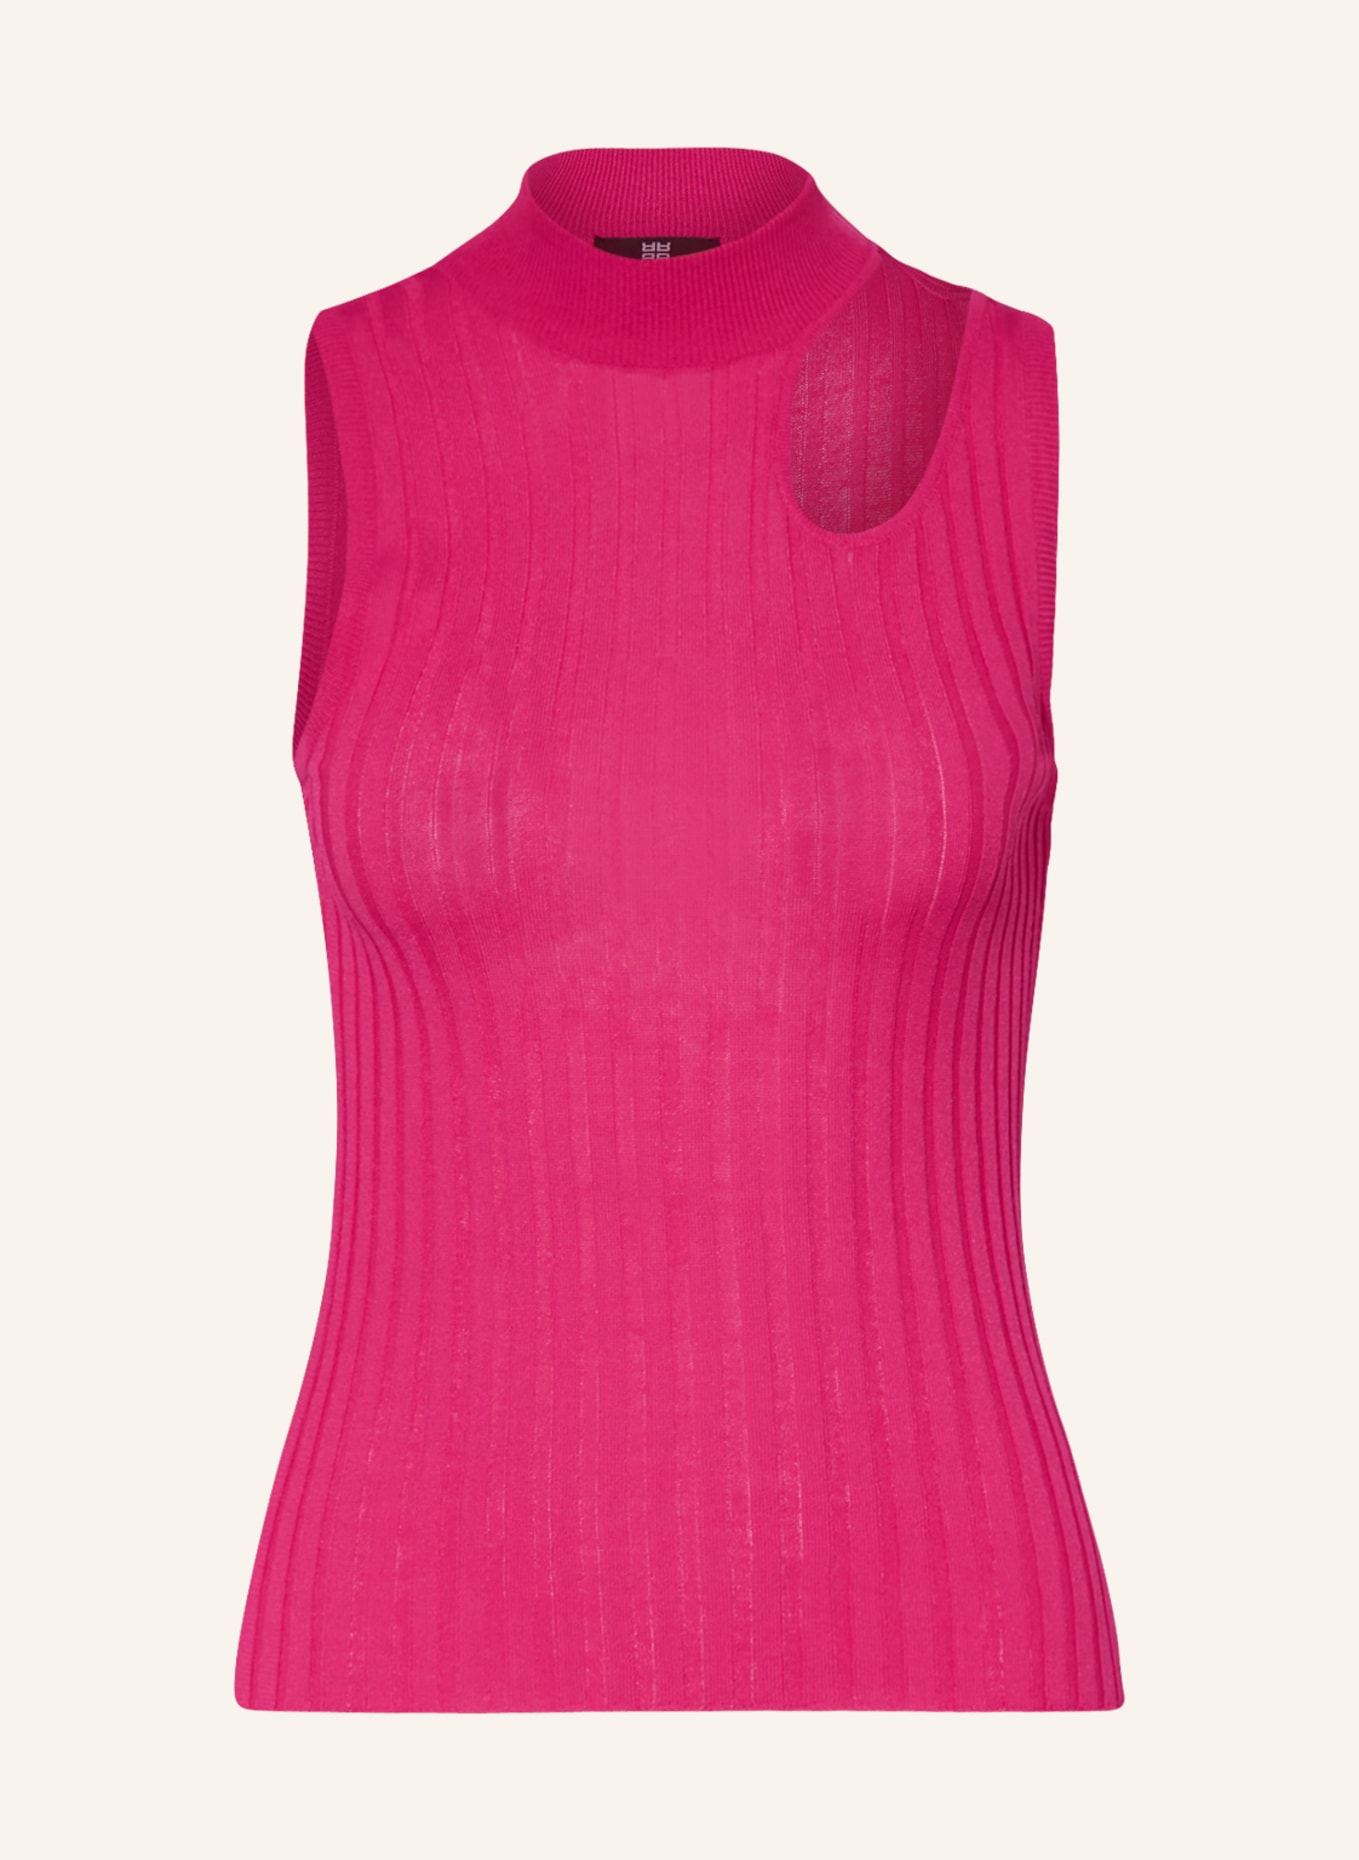 RIANI Knit top with cut-out, Color: PINK (Image 1)